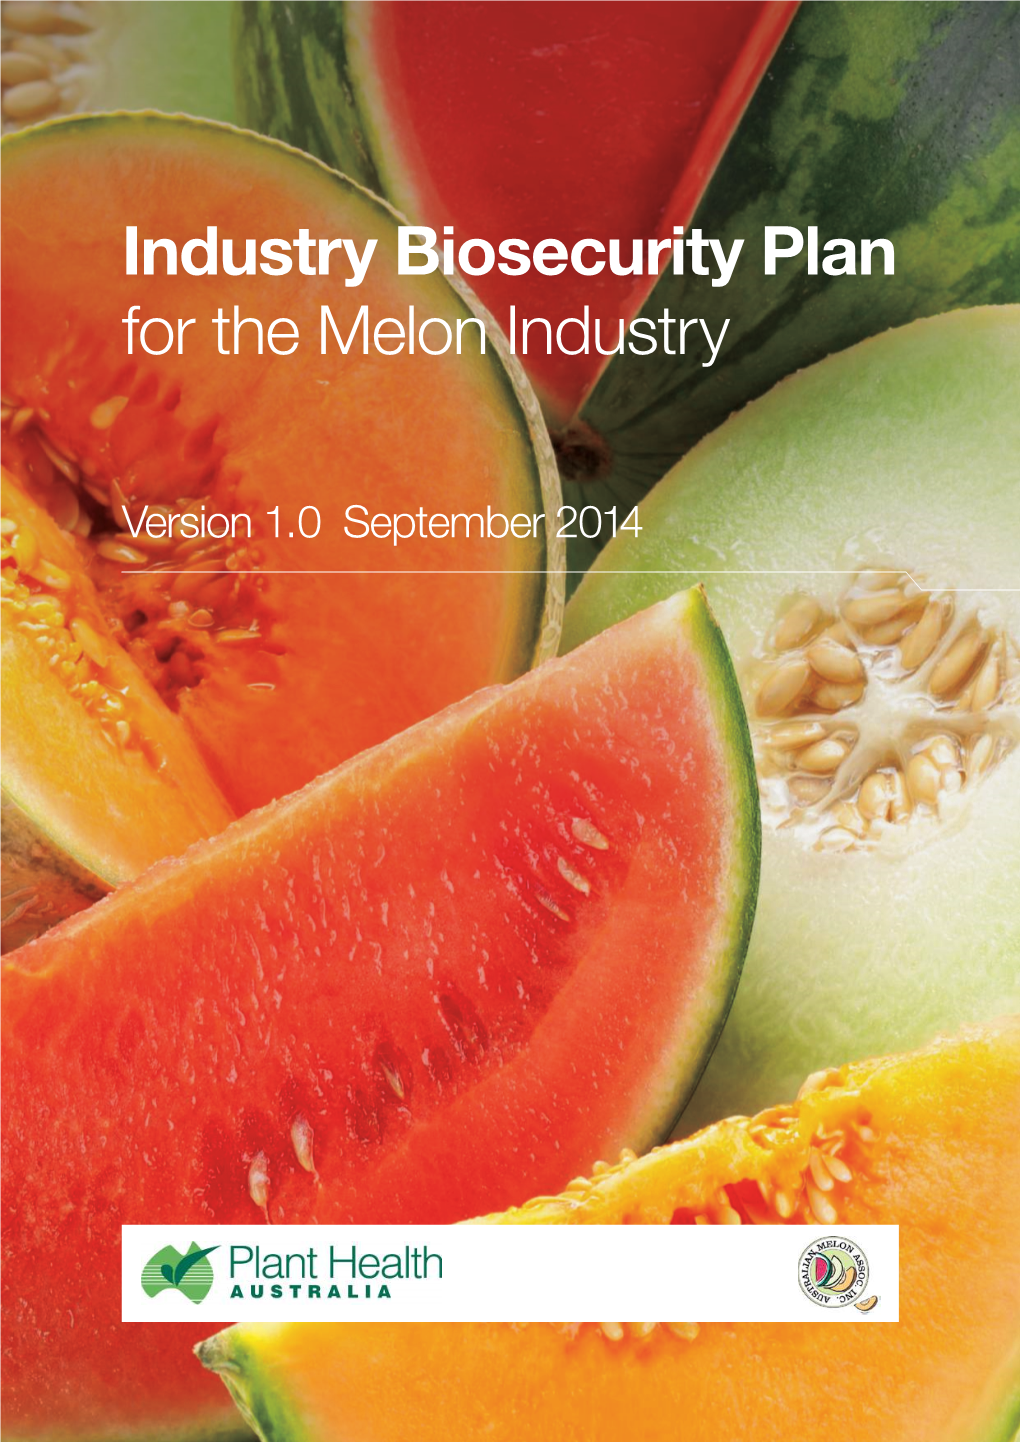 Industry Biosecurity Plan for the Melon Industry